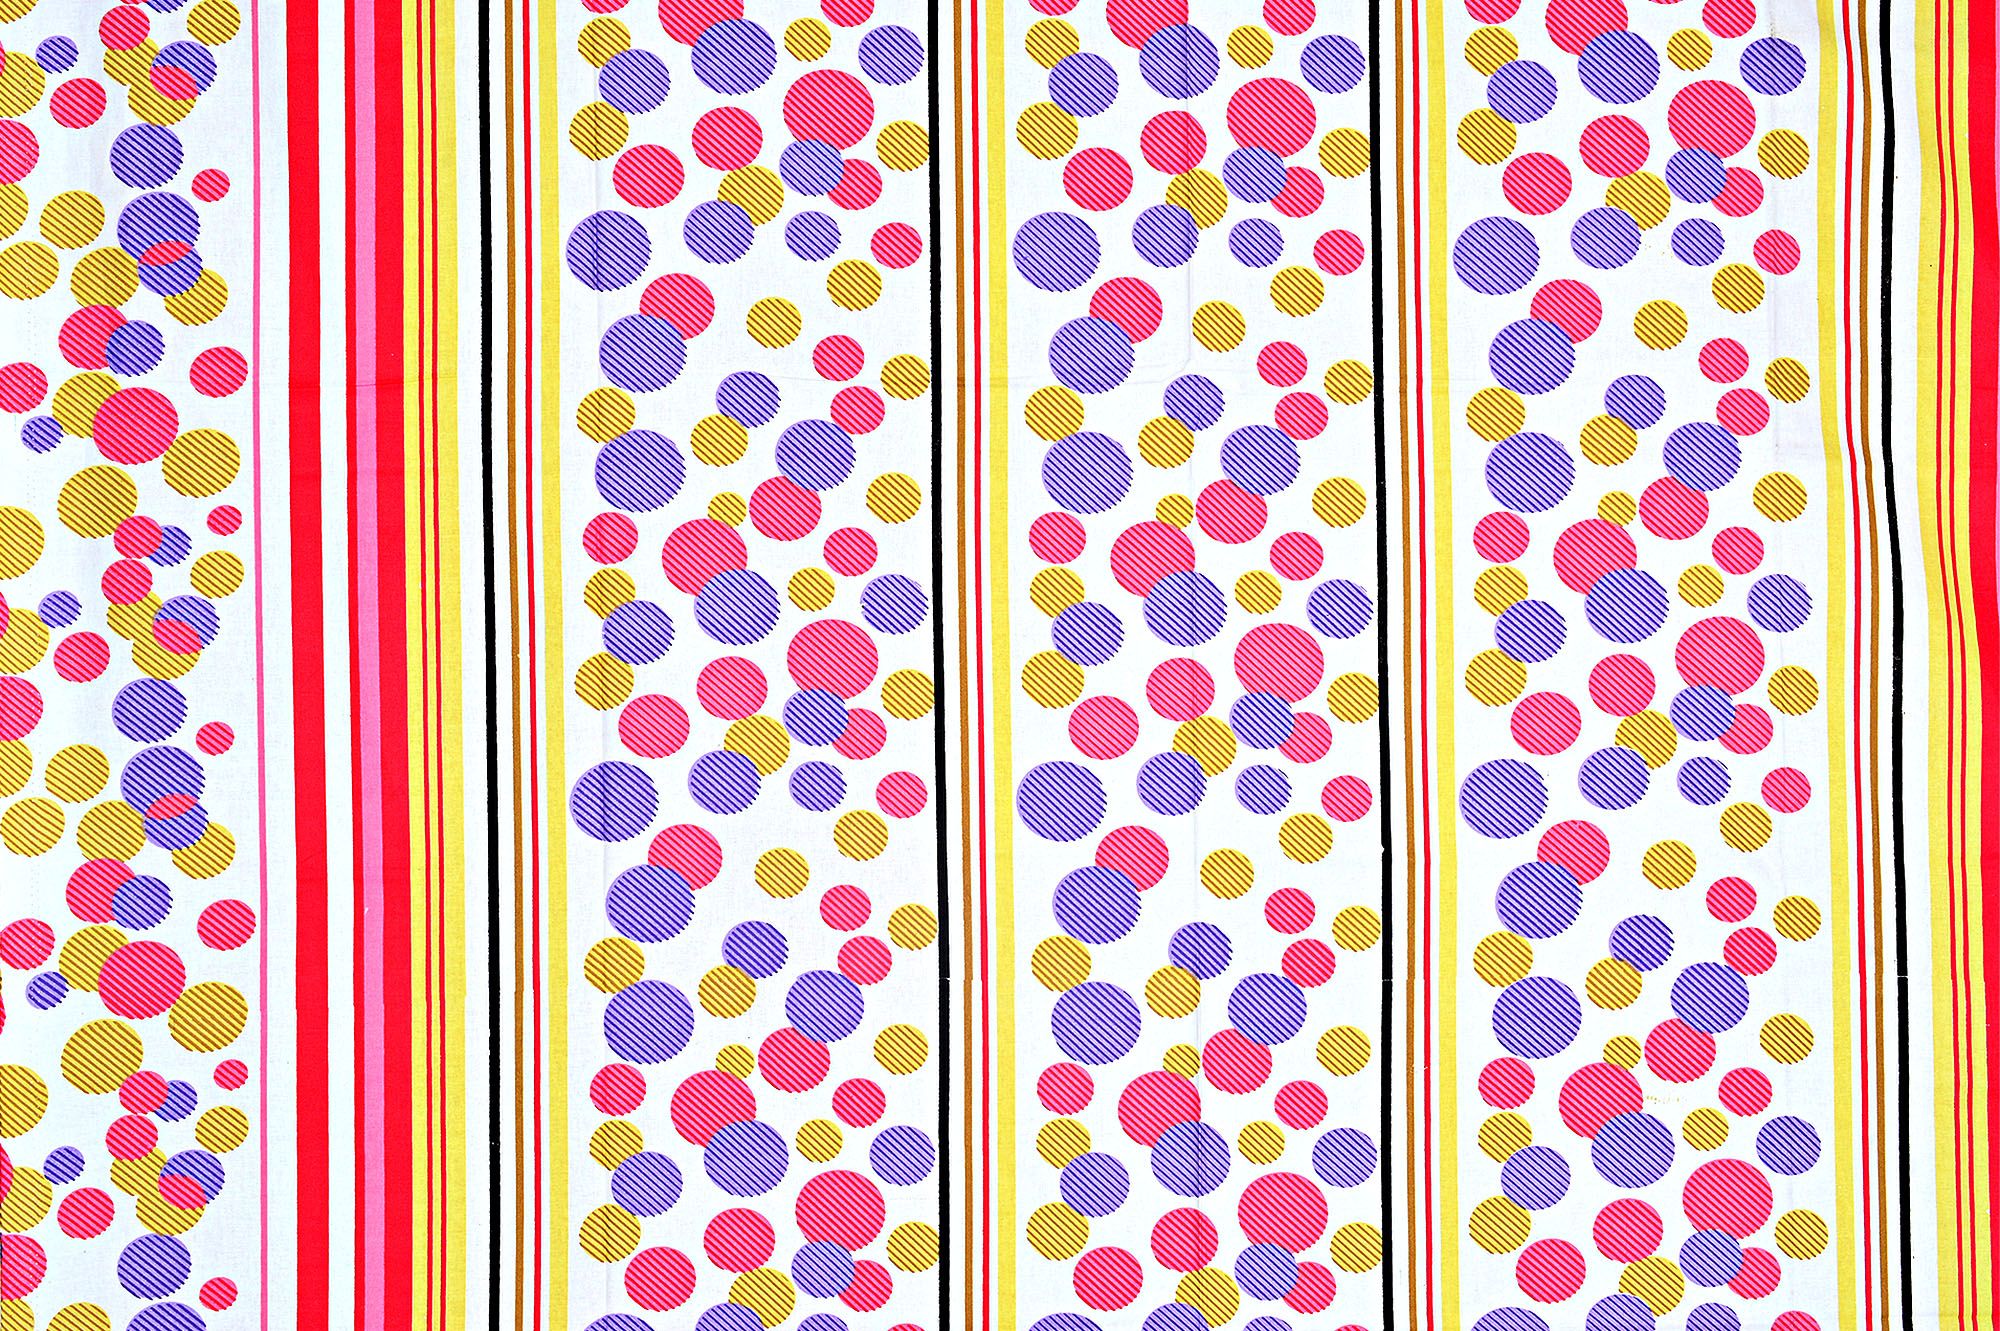 White Base Pink Purple And Yellow Polka Dot And Lining Print Cotton Single Bed Sheet without pillow Cover